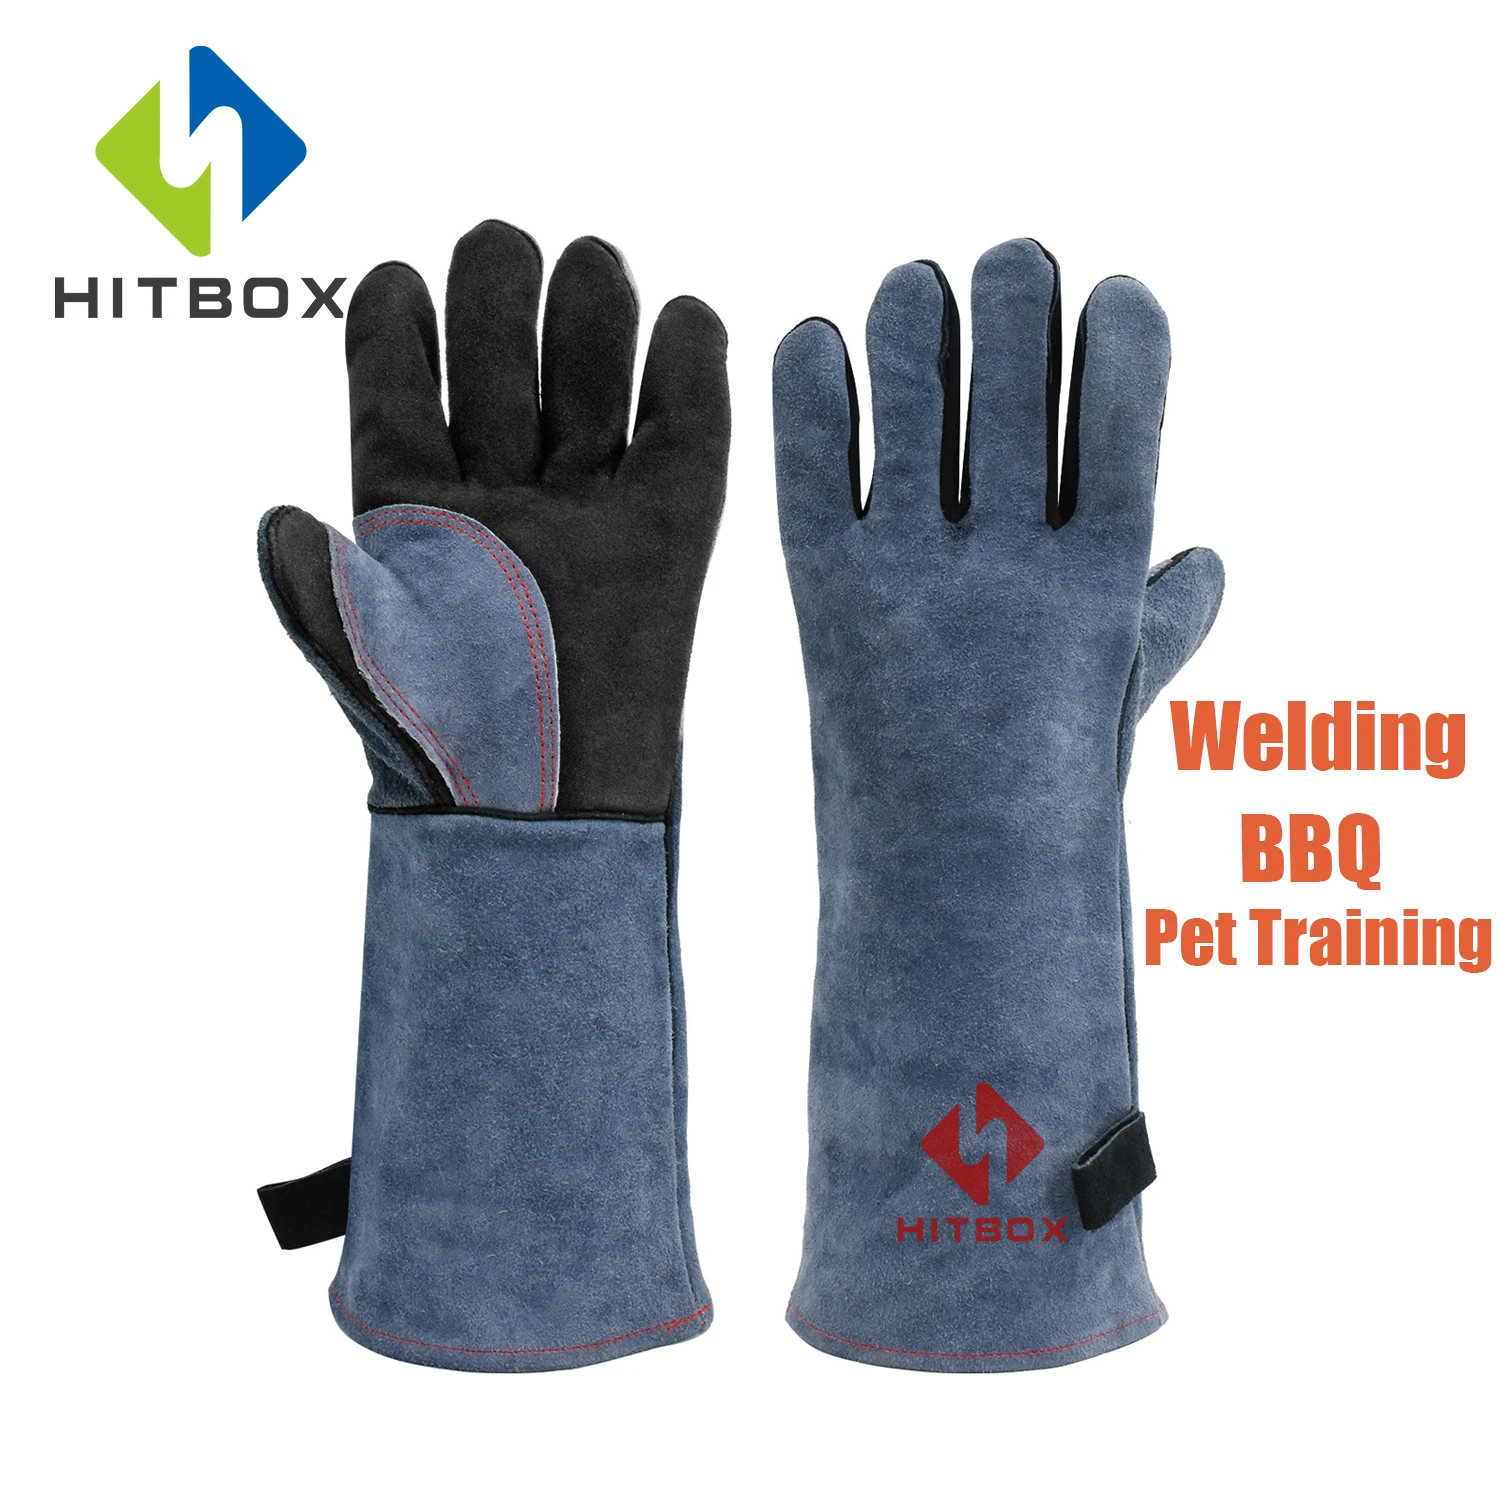 Durable Set Metal Hand Protection For Welding Anti-Heat Protective Gauntlet Welder Gloves BBQ,Grill,Fireplace,Stove Safety Supplies 